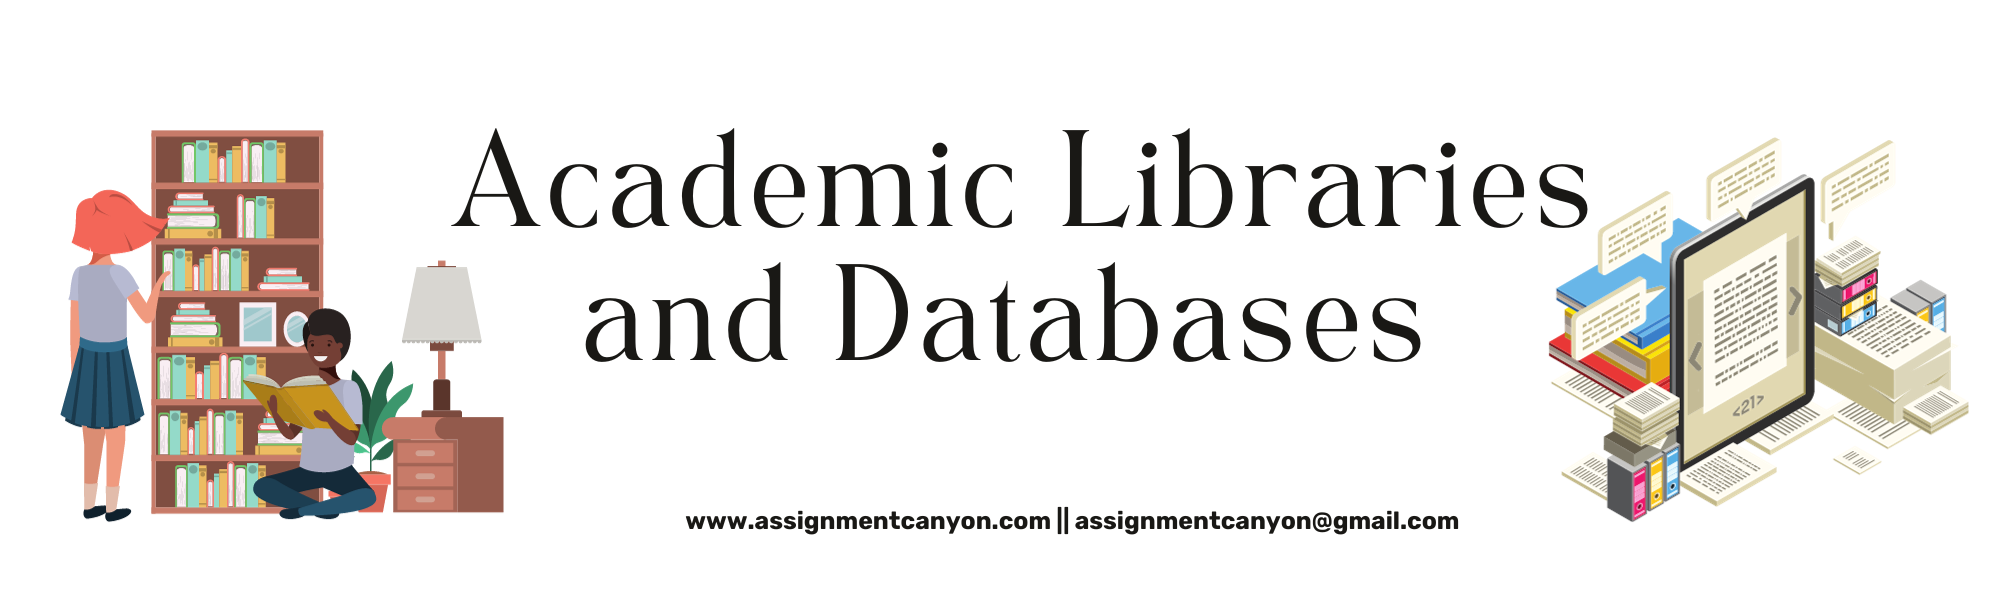 Use Academic Libraries and Databases to get assignment answers for a college student